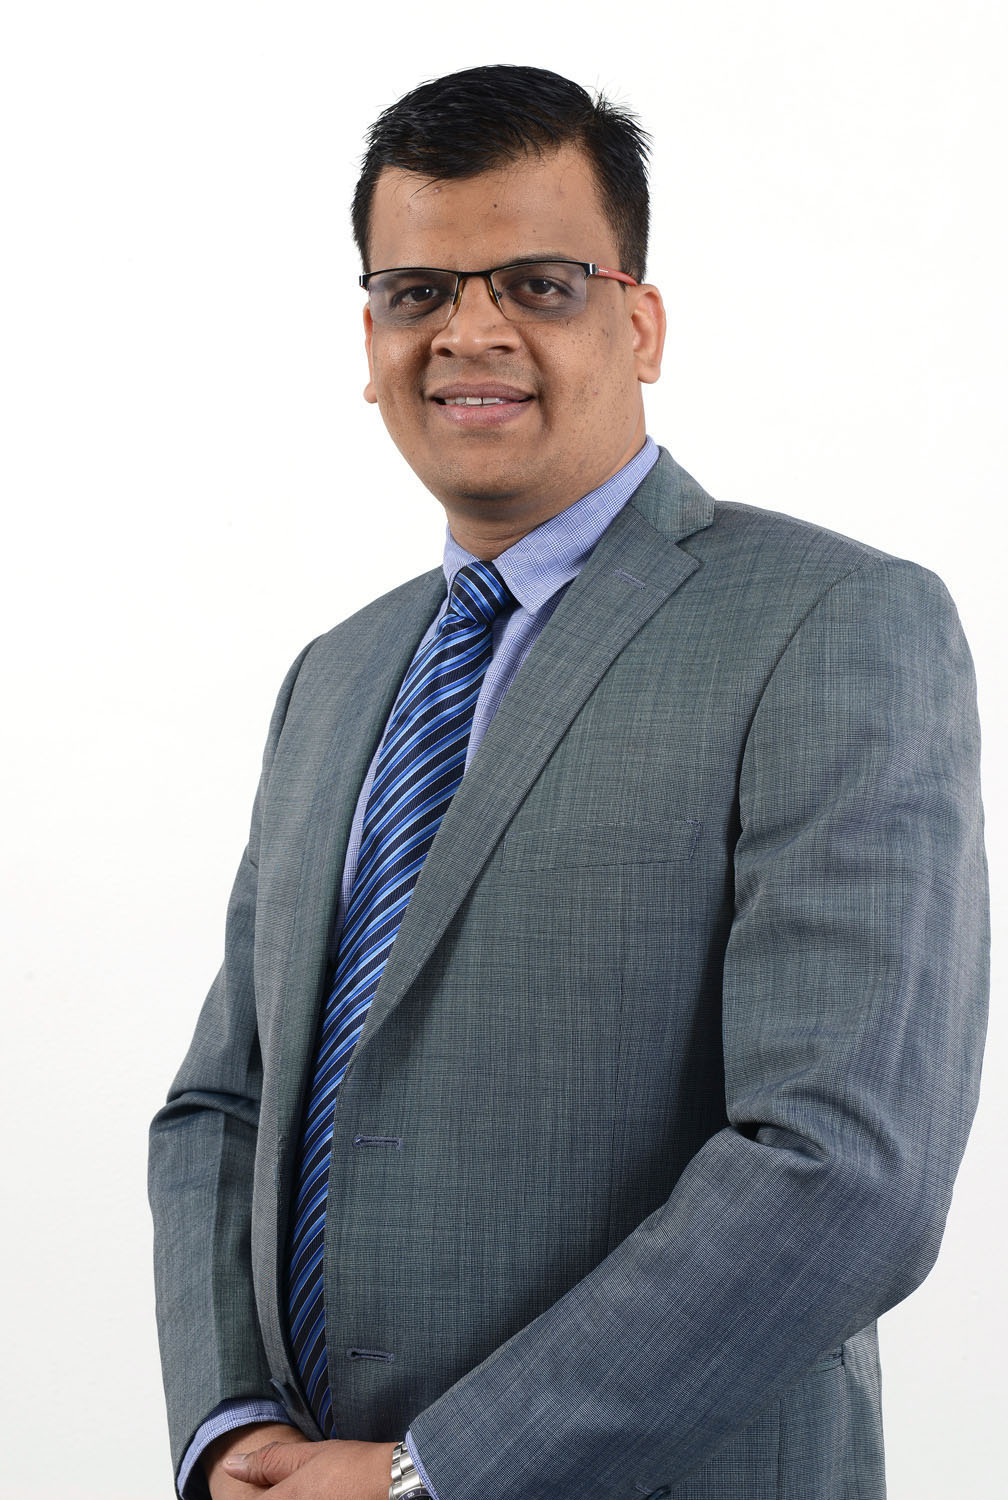 Anil Nair, <span>COE Lead and Head - Talent Management and Organizational L&D, Zydus Group</span>